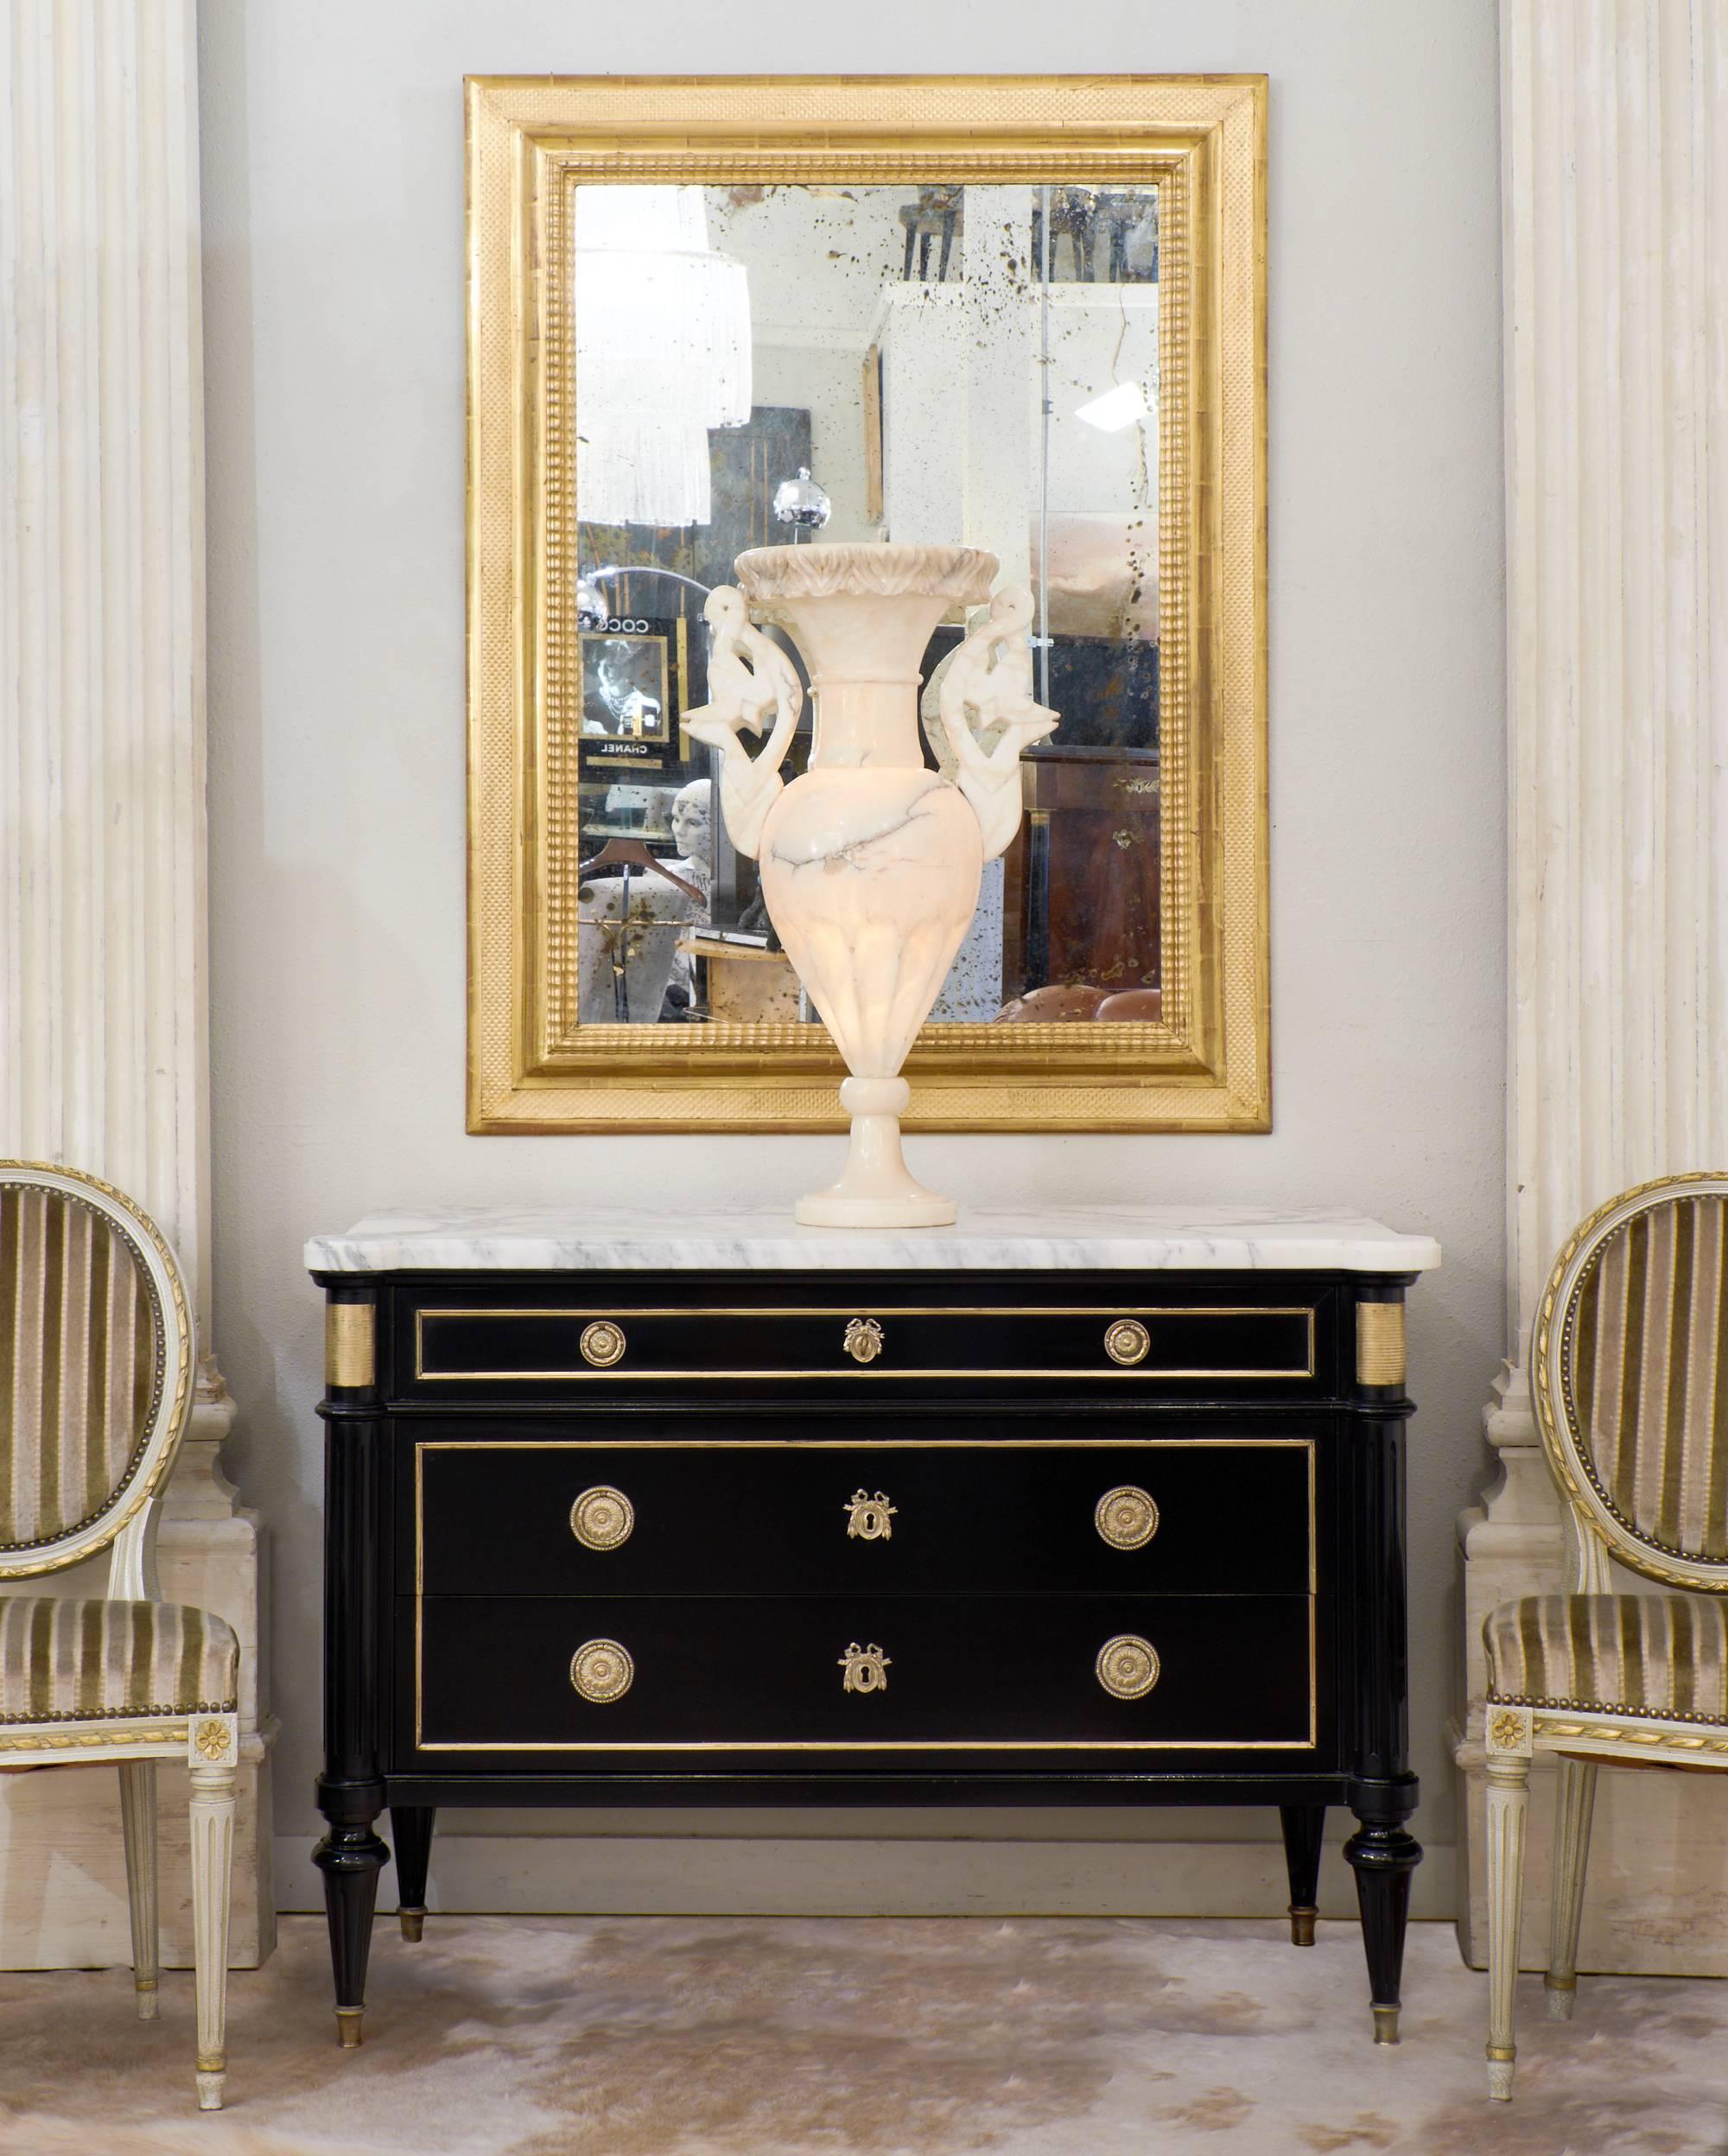 French antique Louis XVI style commode of ebonized mahogany with a hand-rubbed French polish. This traditional finish used in France for museum-quality pieces gives this stately chest of drawers a deep, lustrous finish. Original Carrara marble slab,